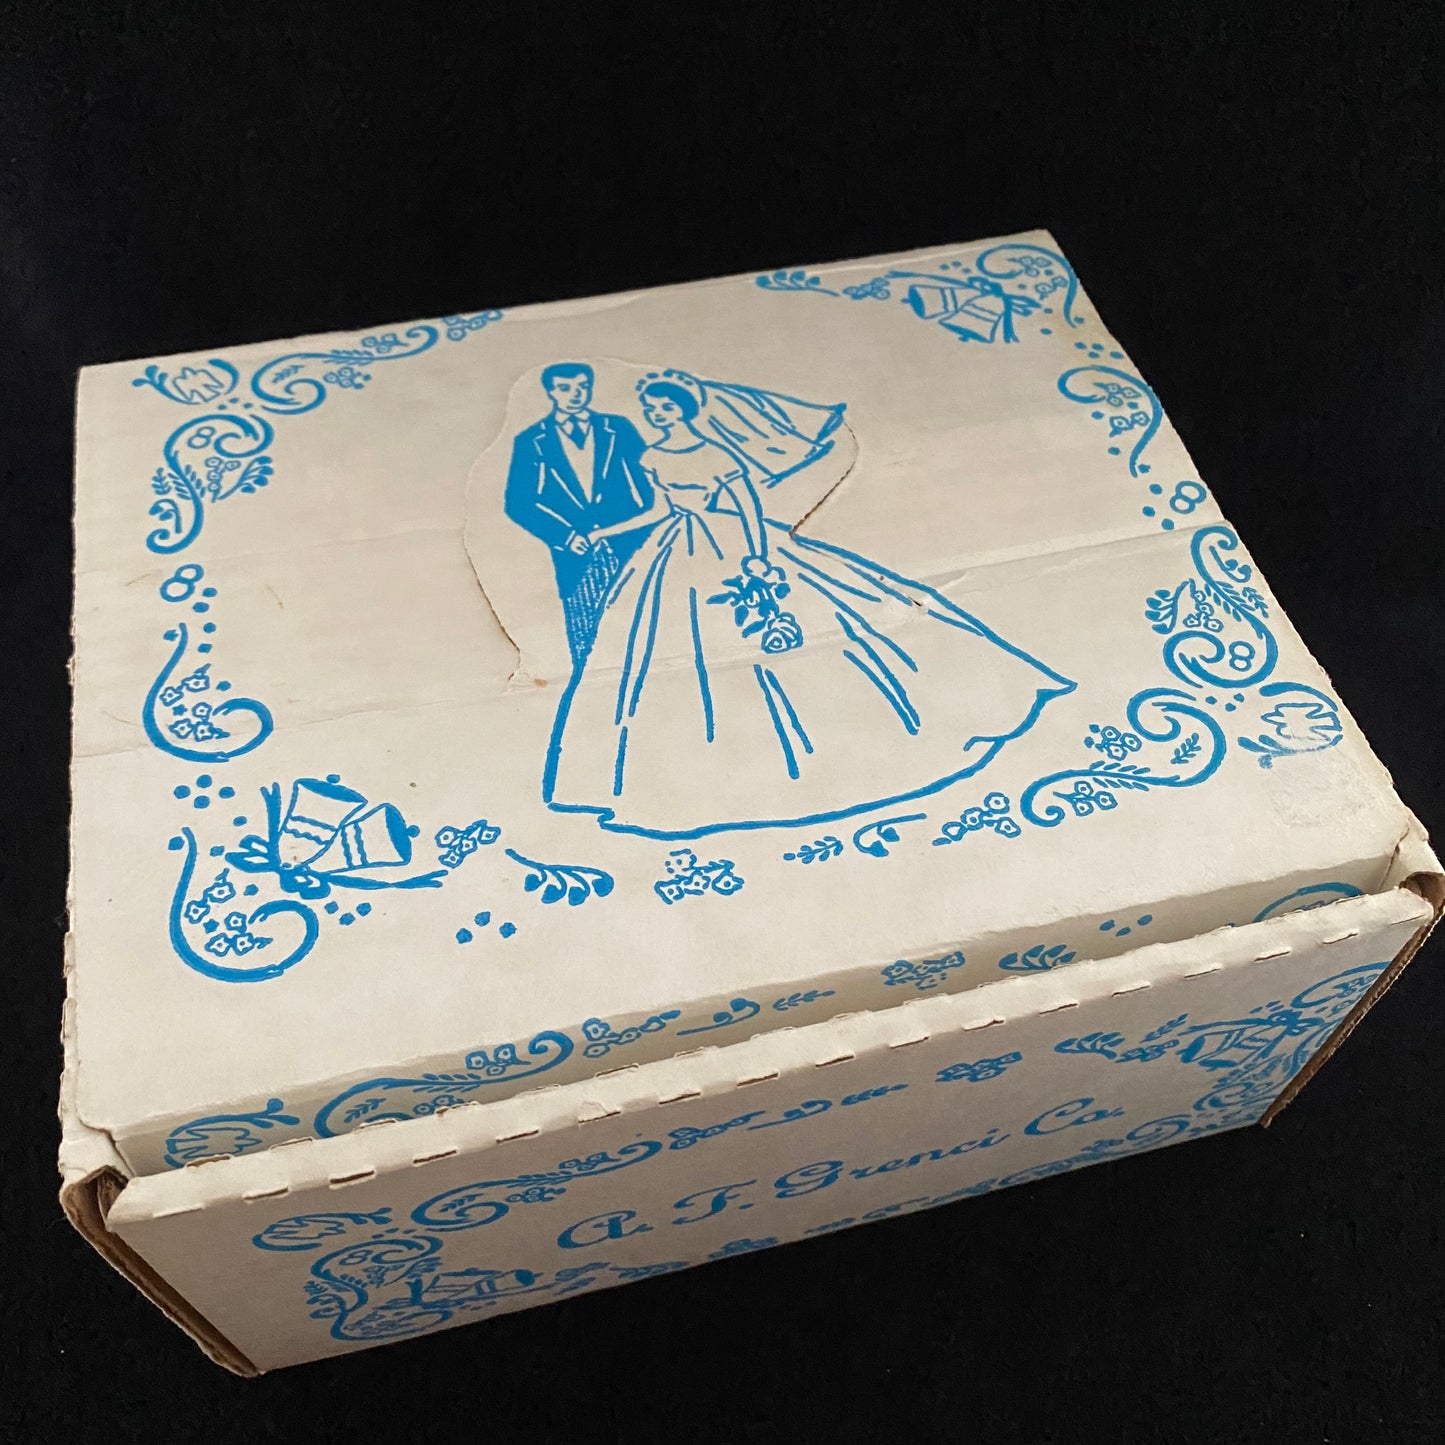 1950s Bride & Groom Champagne Glasses With Their Original Box